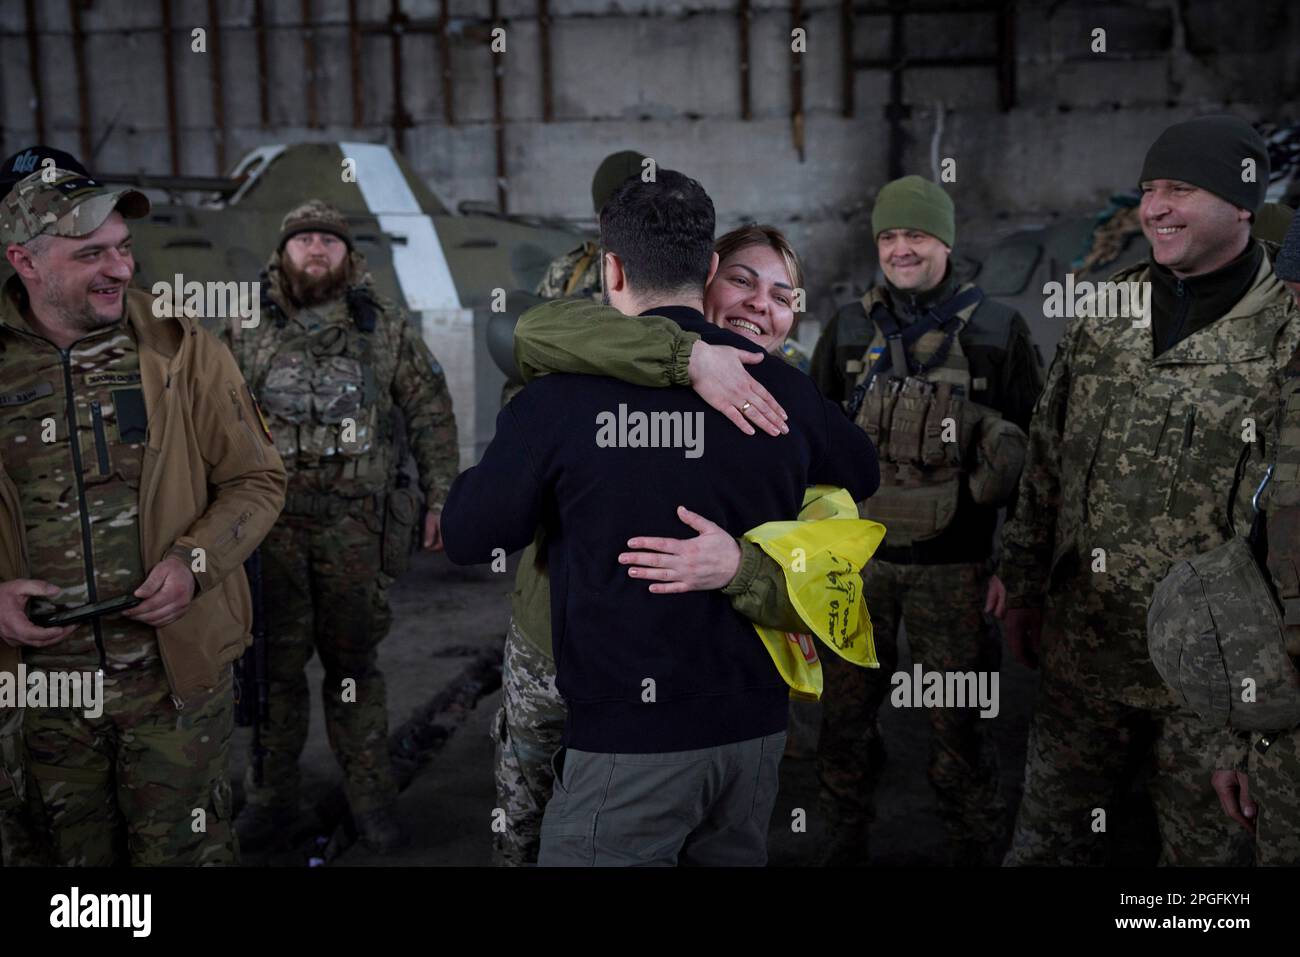 Bakhmut, Ukraine. 22nd Mar, 2023. Ukrainian President Volodymyr Zelenskyy, center, is embraced by a female soldier during a visit to the frontlines positions in the Donetsk region, March 22, 2023 in Bakhmut, Ukraine. Zelenskyy boosted morale and presented state medals to the soldiers defending against the Russian invasion. Credit: Pool Photo/Ukrainian Presidential Press Office/Alamy Live News Stock Photo